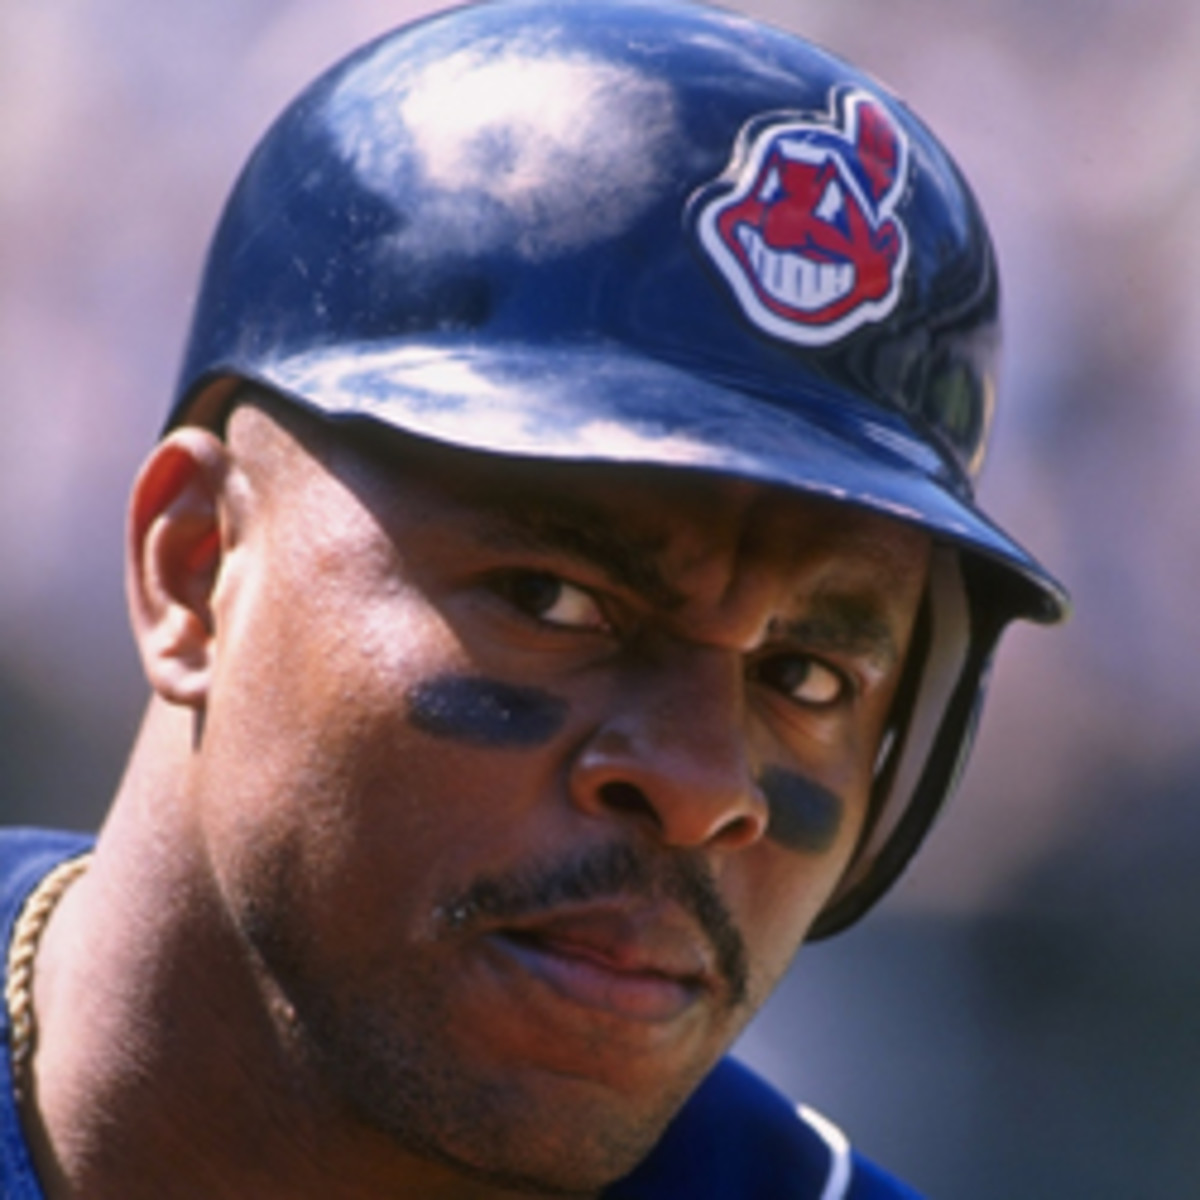 Albert Belle wants to be next Cleveland Indians manager - Sports Illustrated